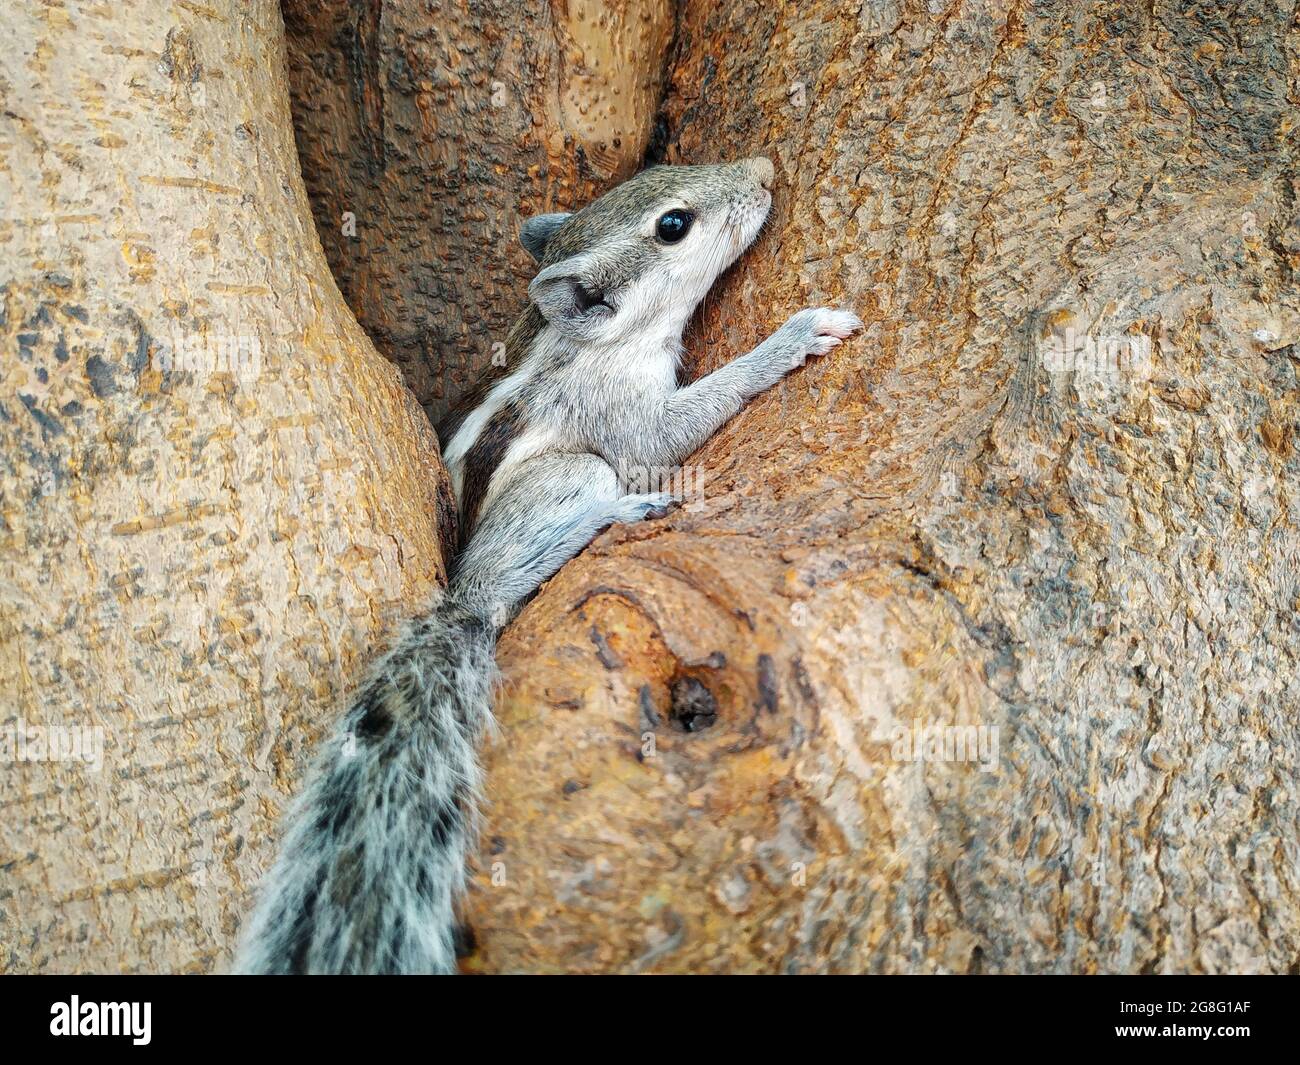 Closeup shot of a small chipmunk on the tree trunk Stock Photo